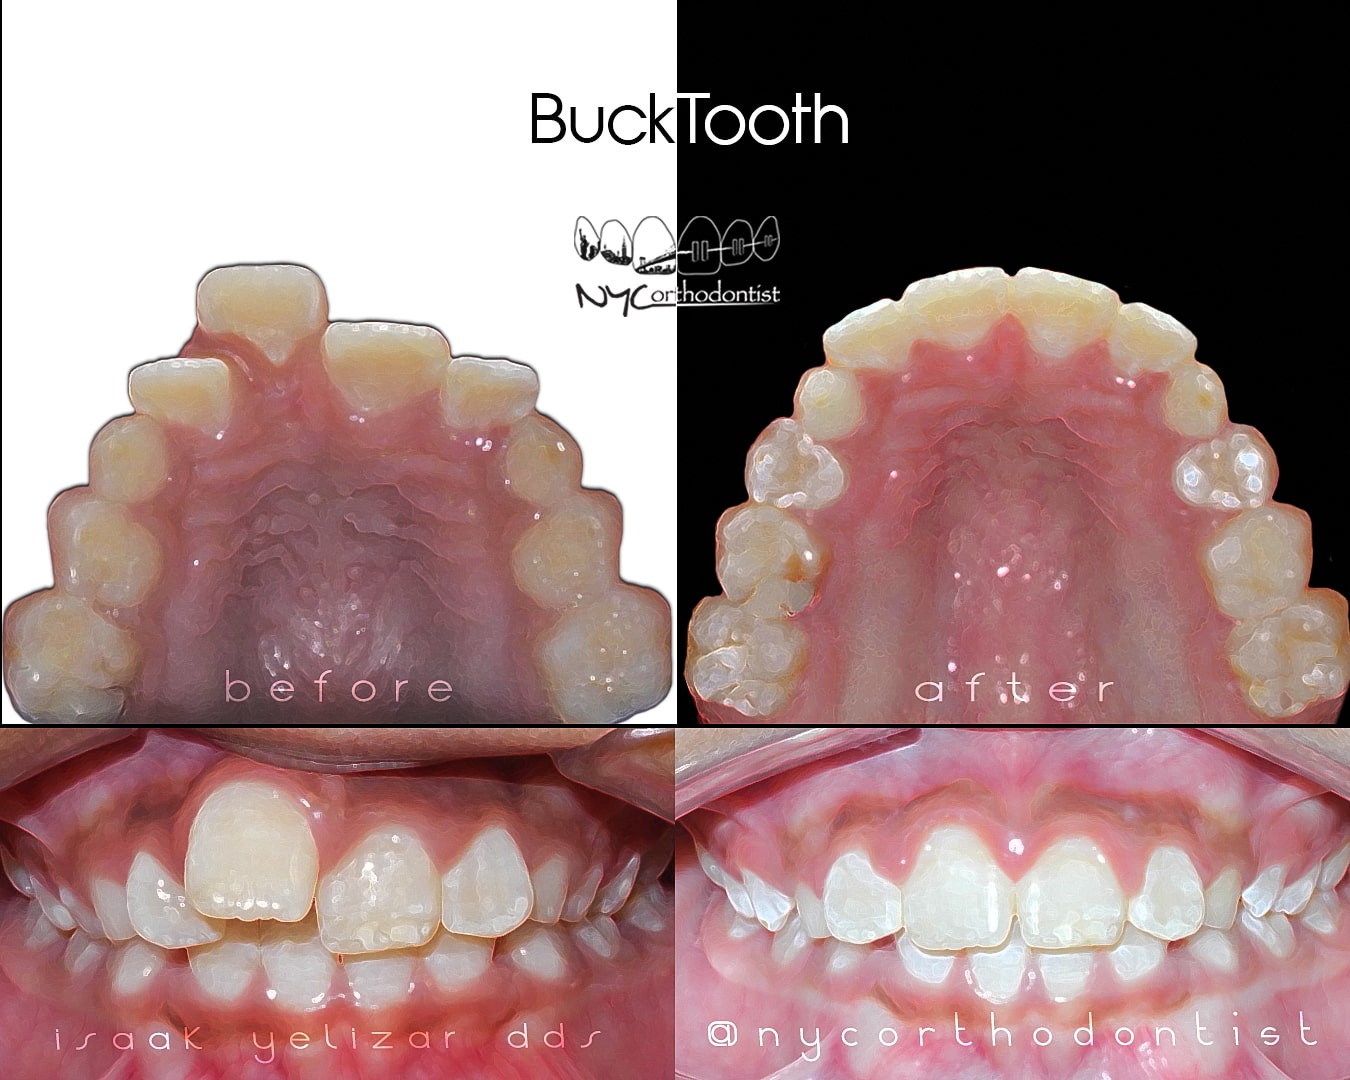 Inside bottom teeth and front of smile before and after phase one orthondontics